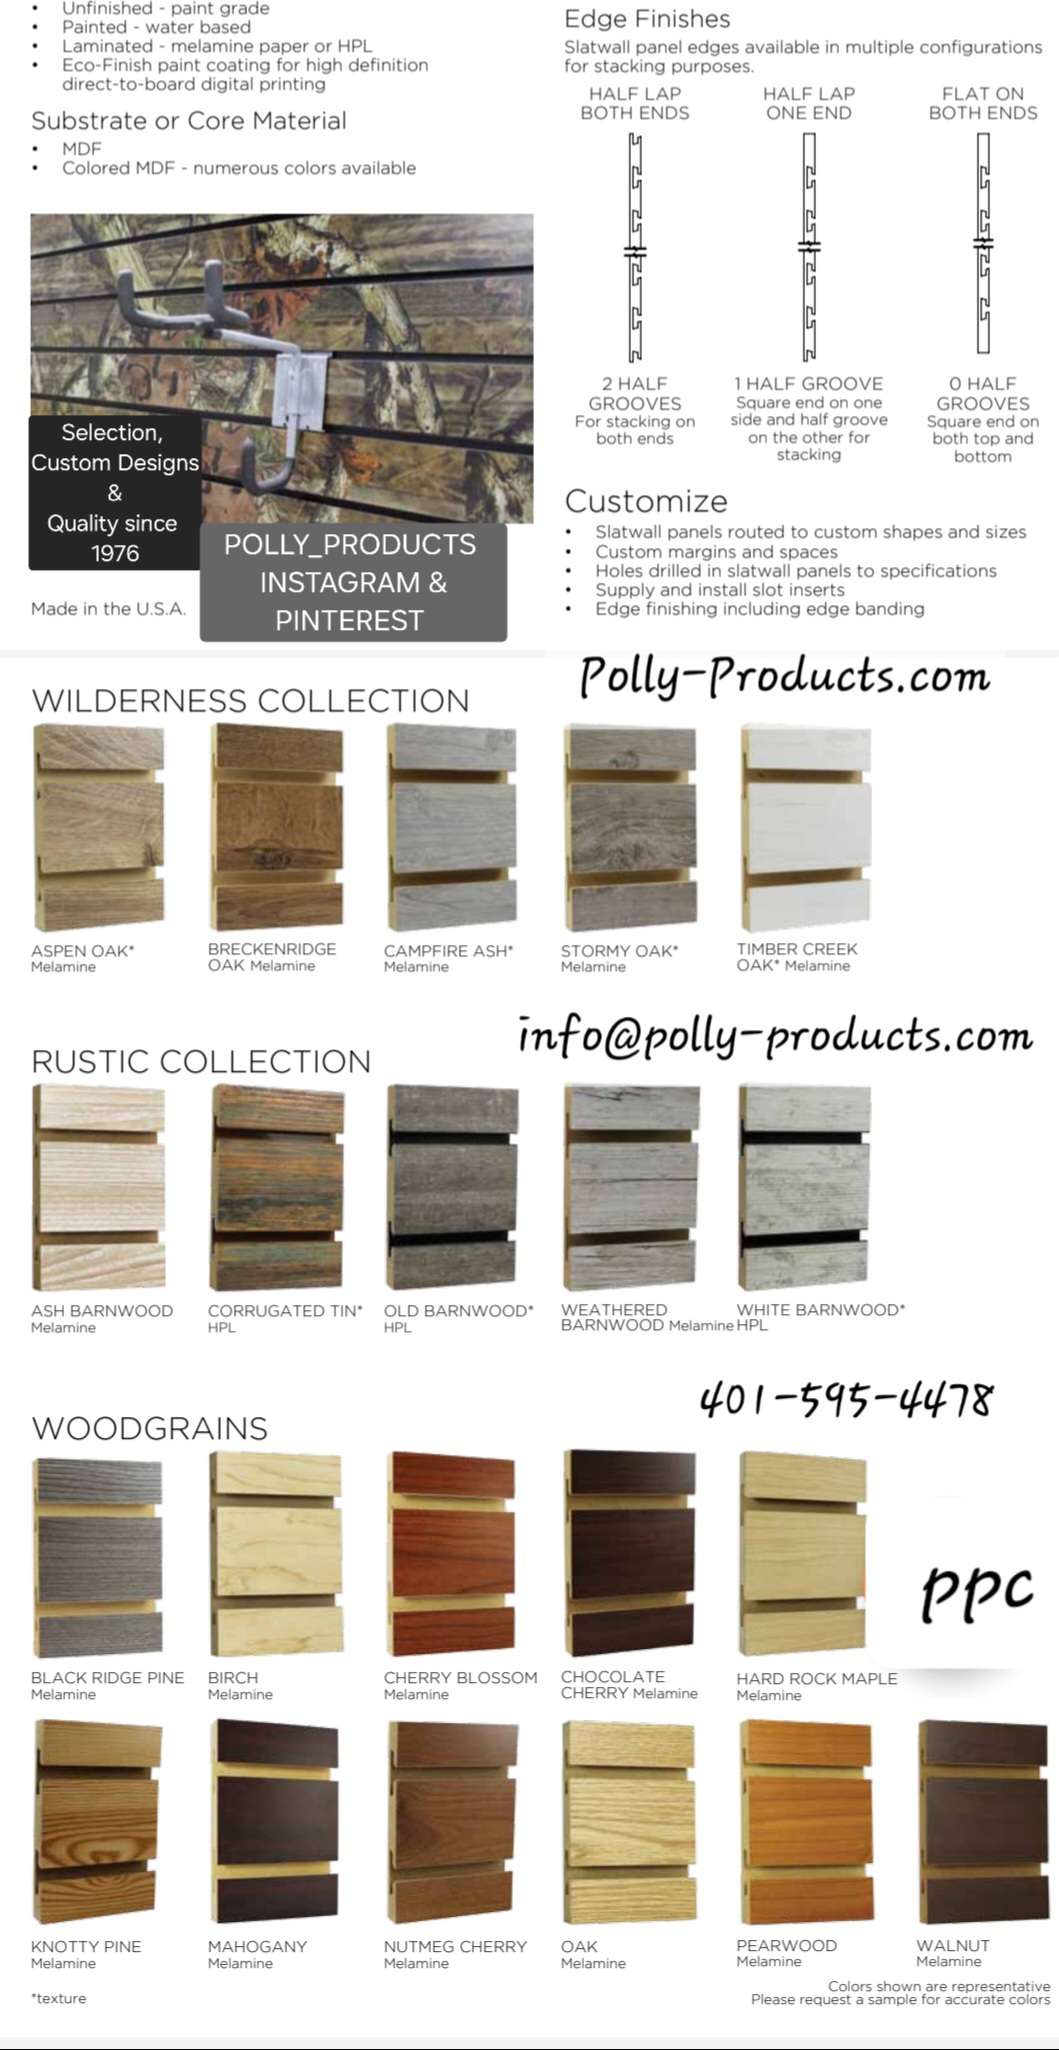 PPC SLATWALL PANELS MADE IN THE USA QUALITY. MANY COLOR AND FINISH OPTIONS!